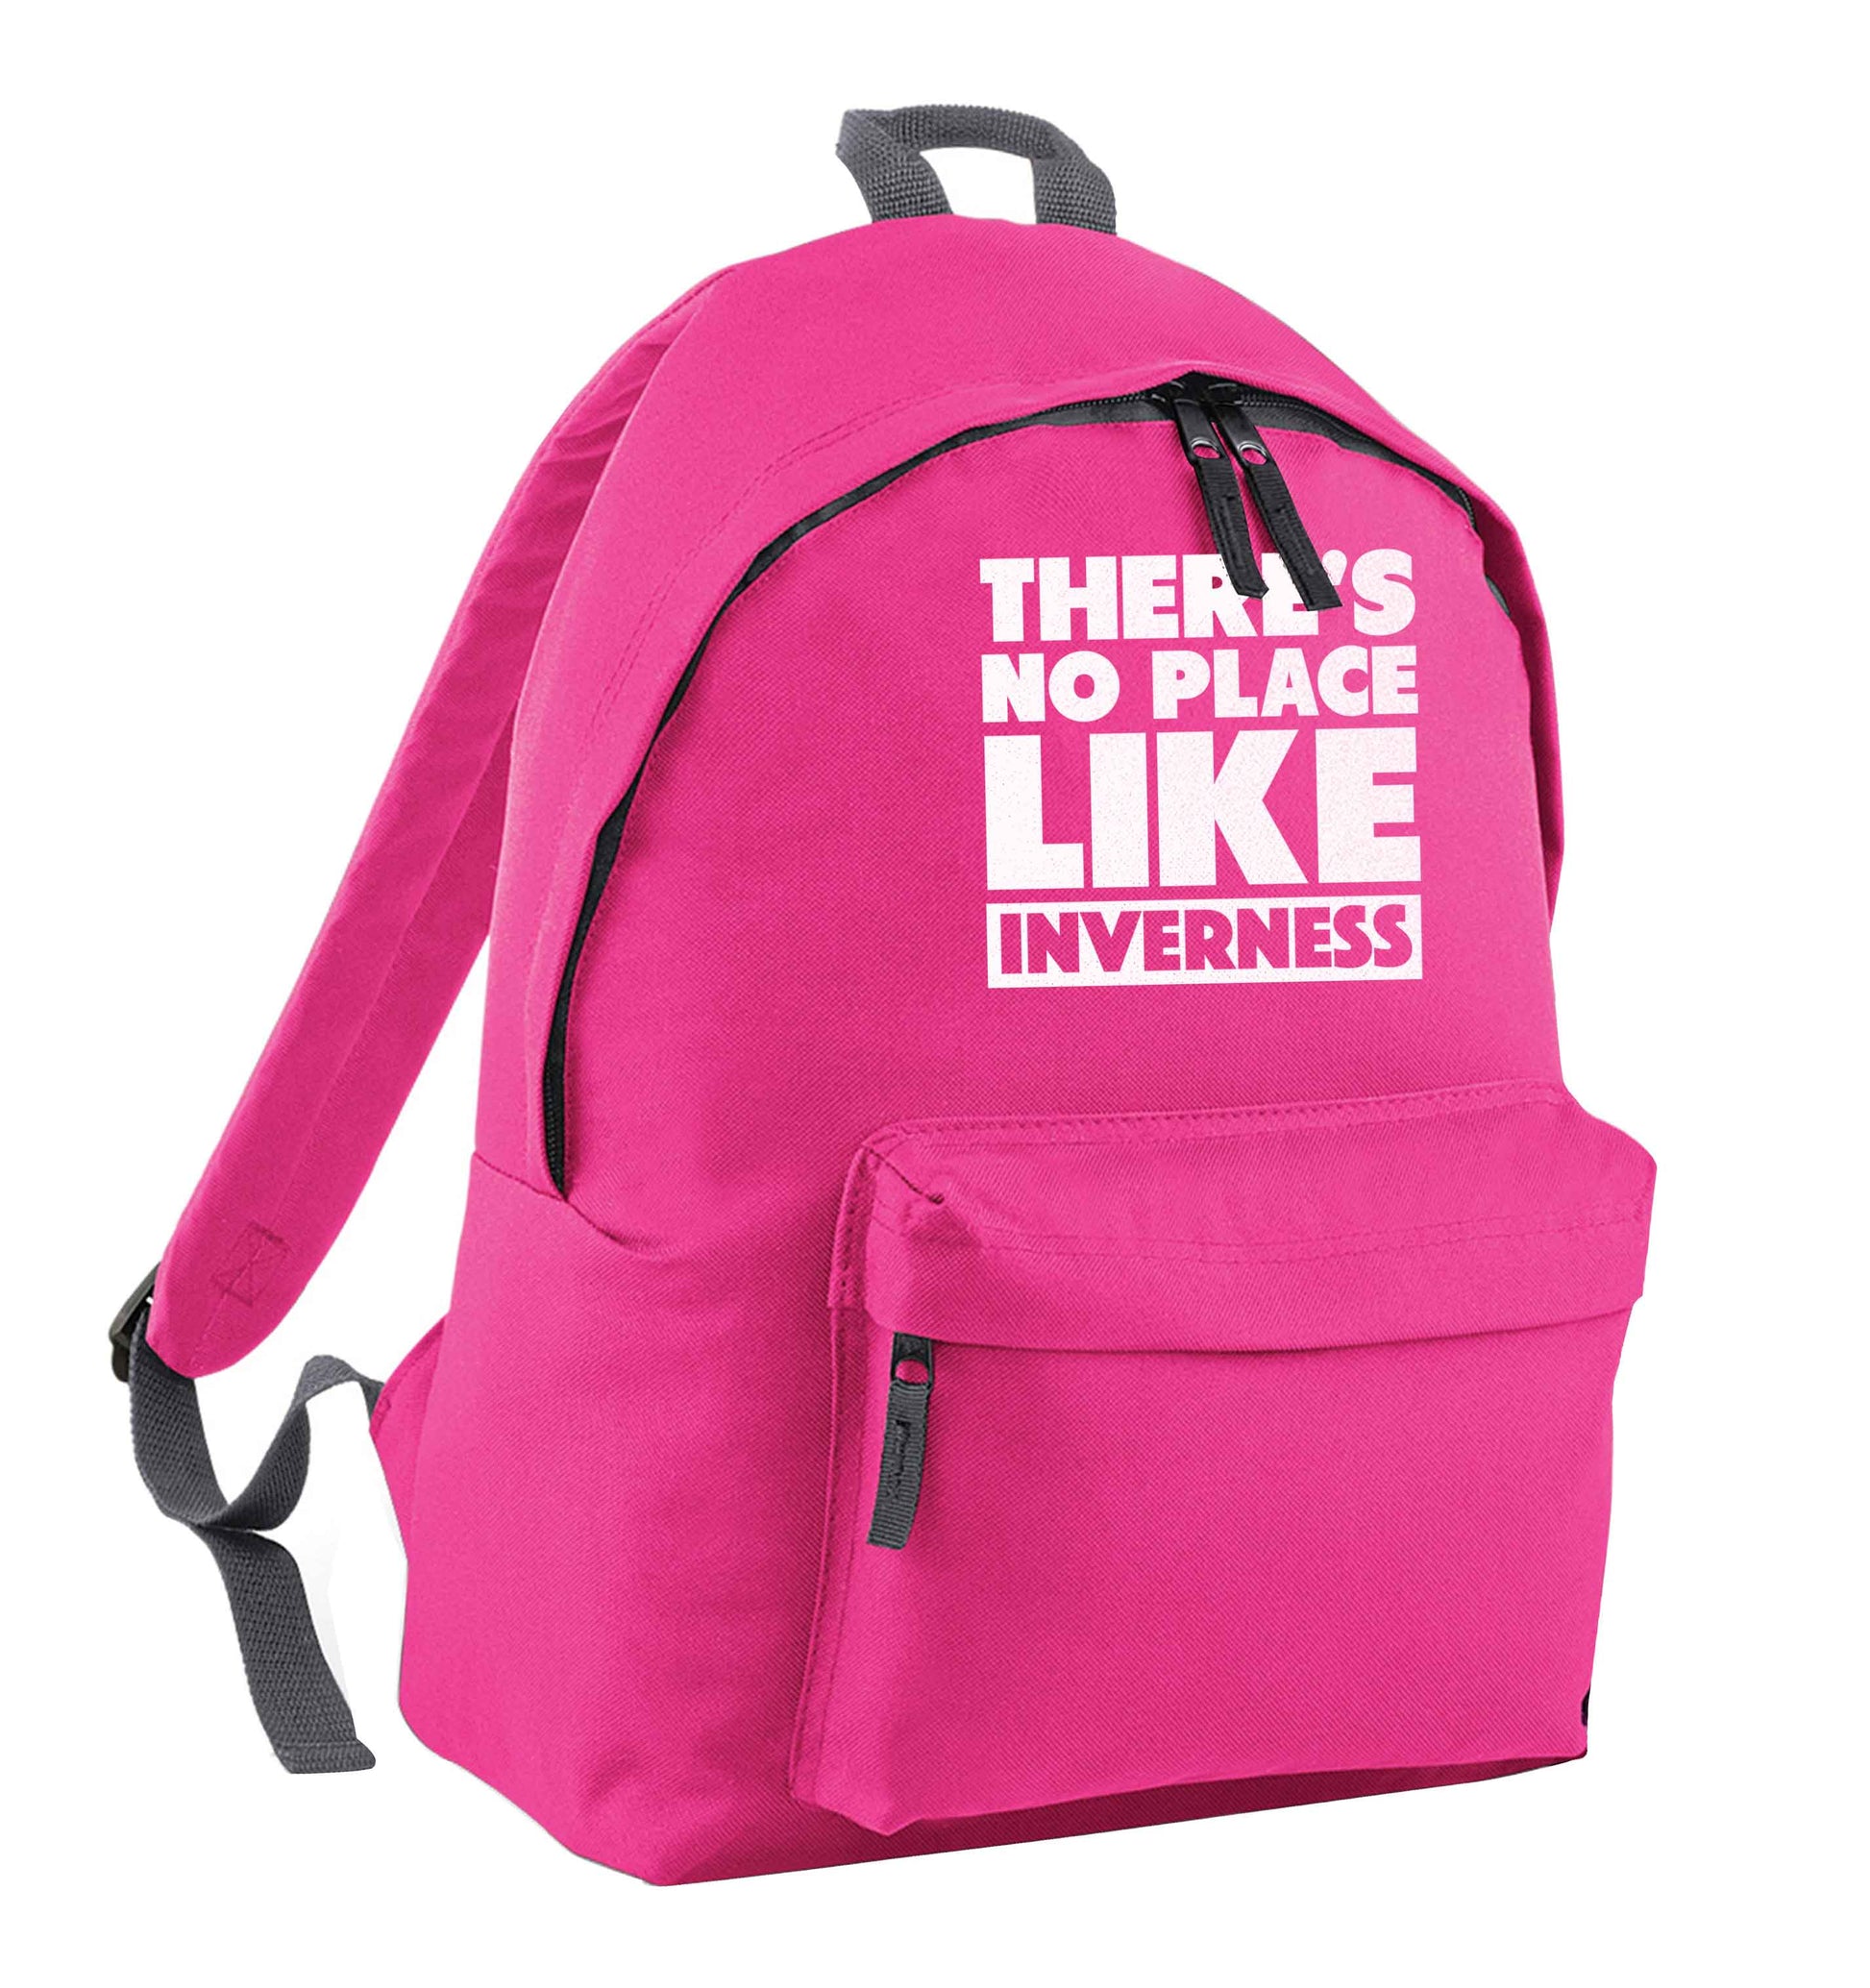 There's no place like Inverness pink children's backpack